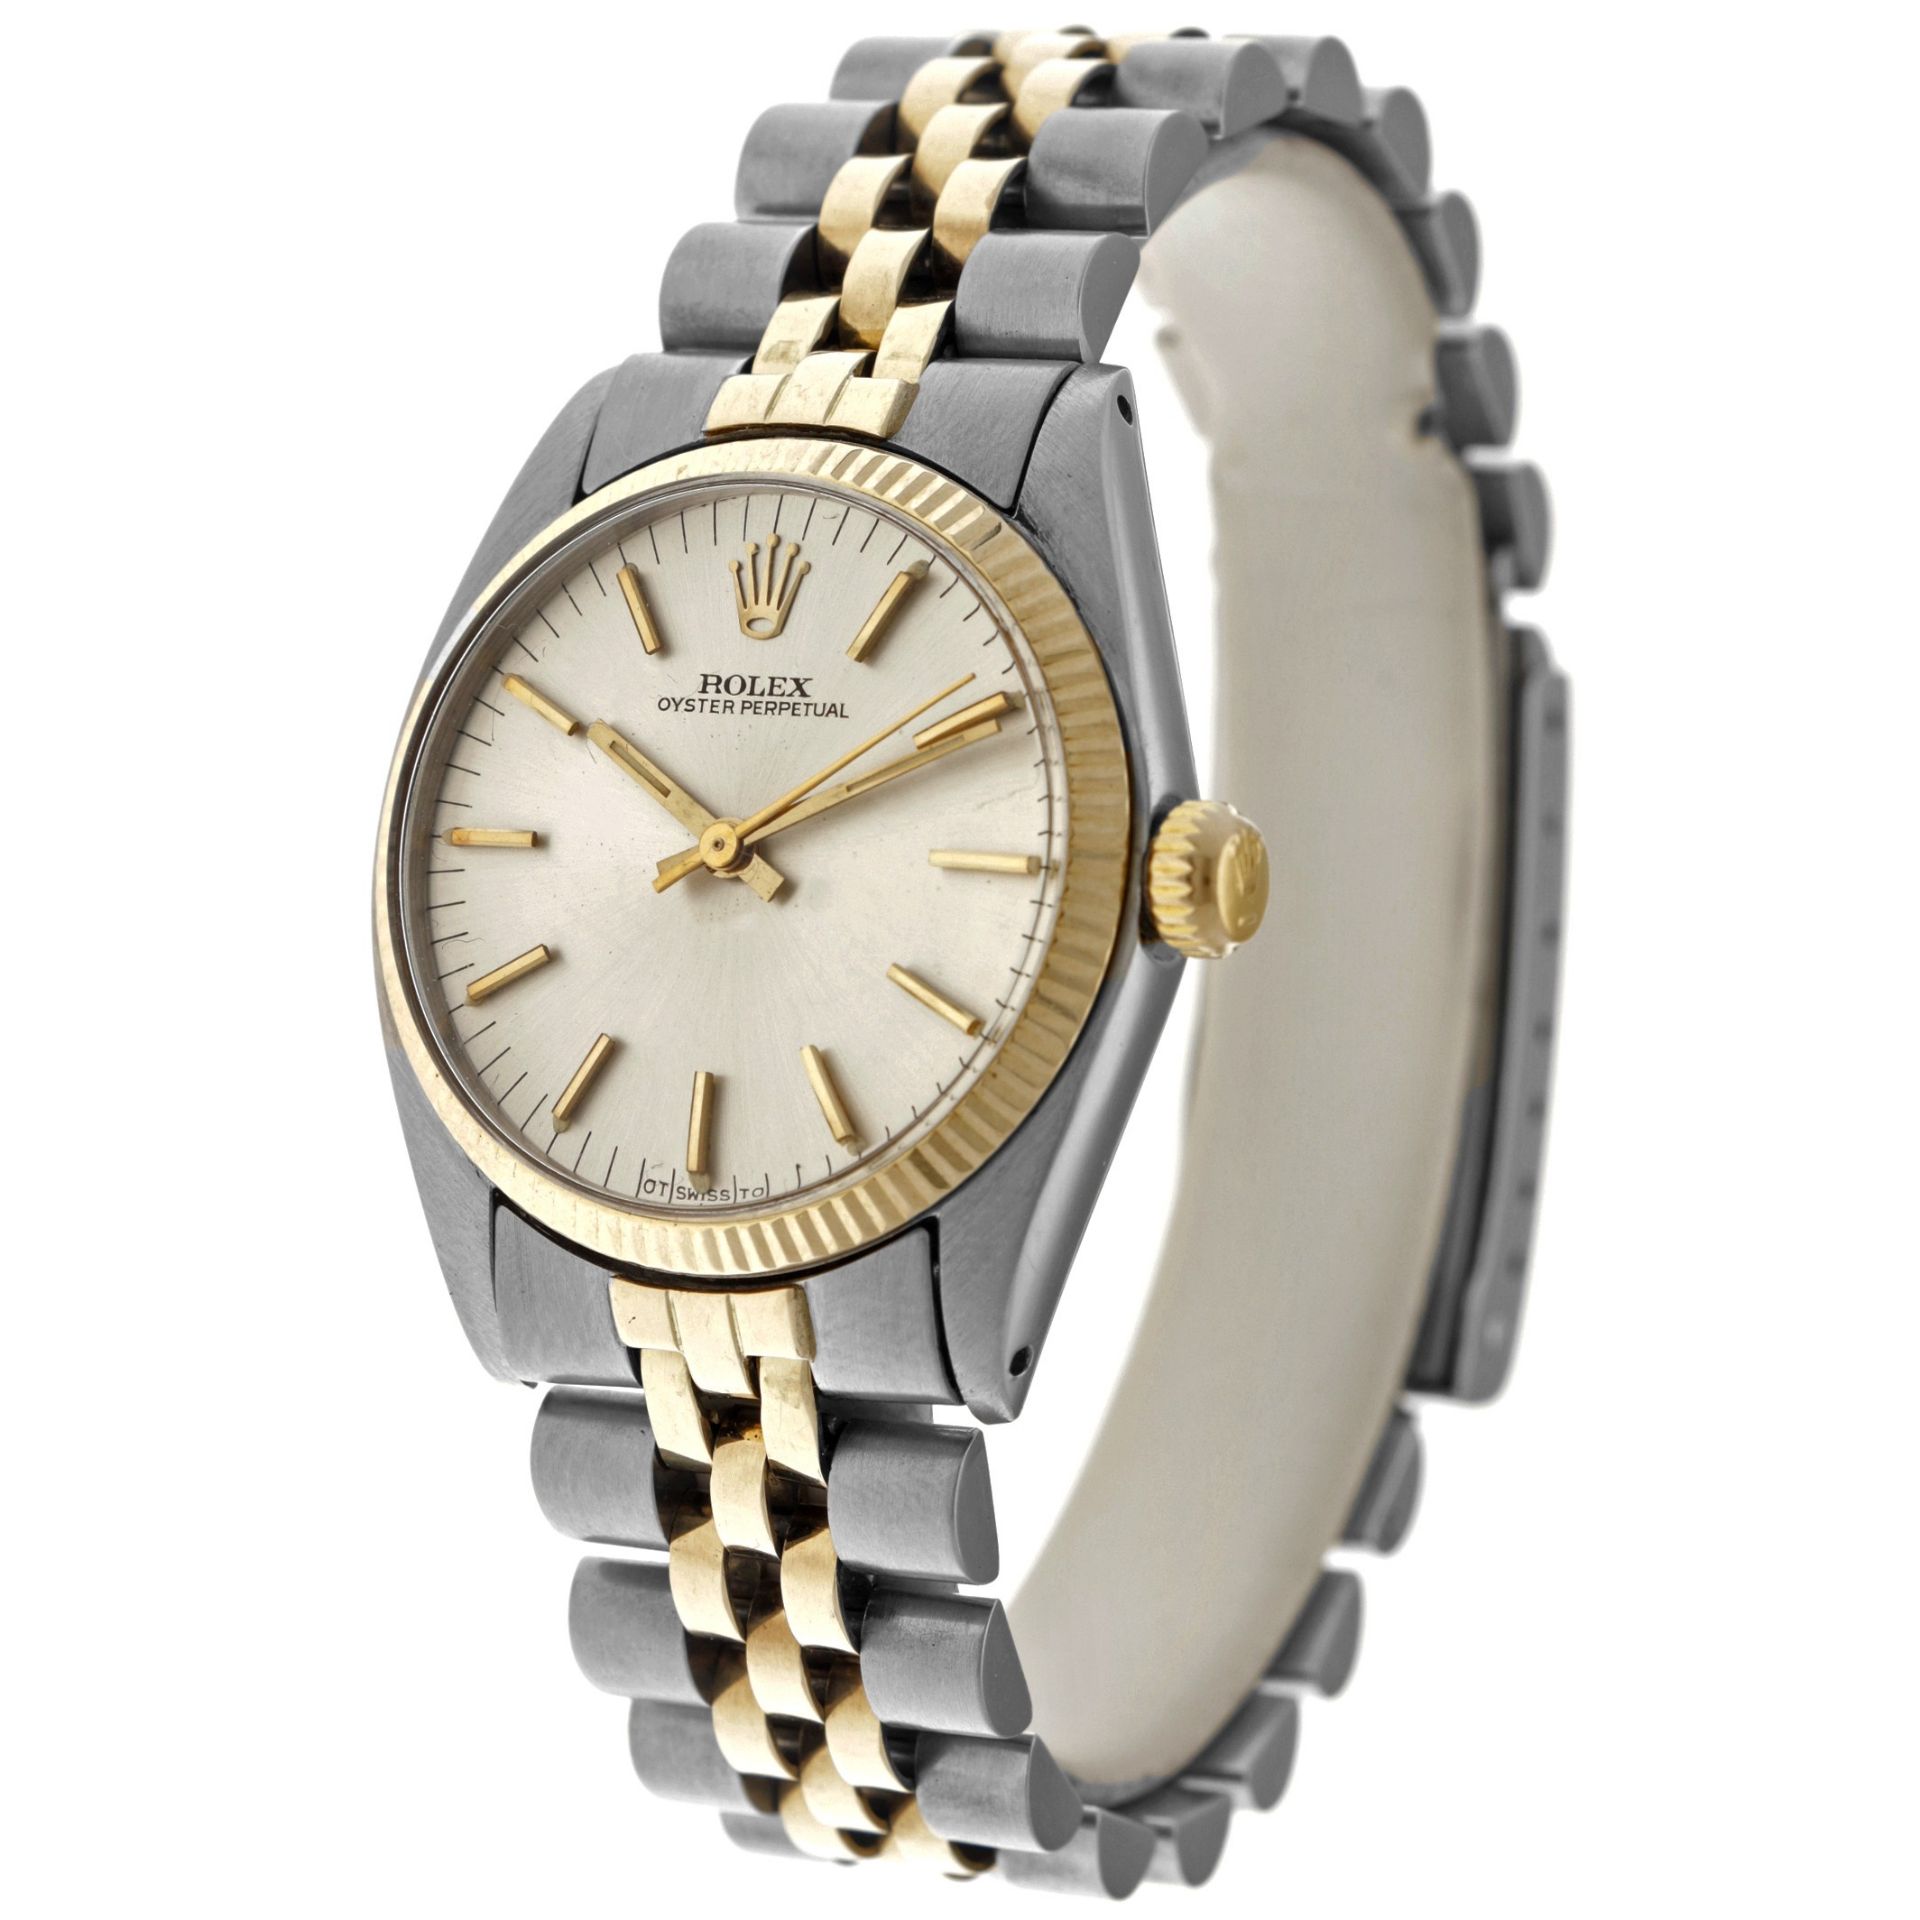 No Reserve - Rolex Oyster Perpetual 6751 - Midsize watch - approx. 1976. - Image 2 of 6